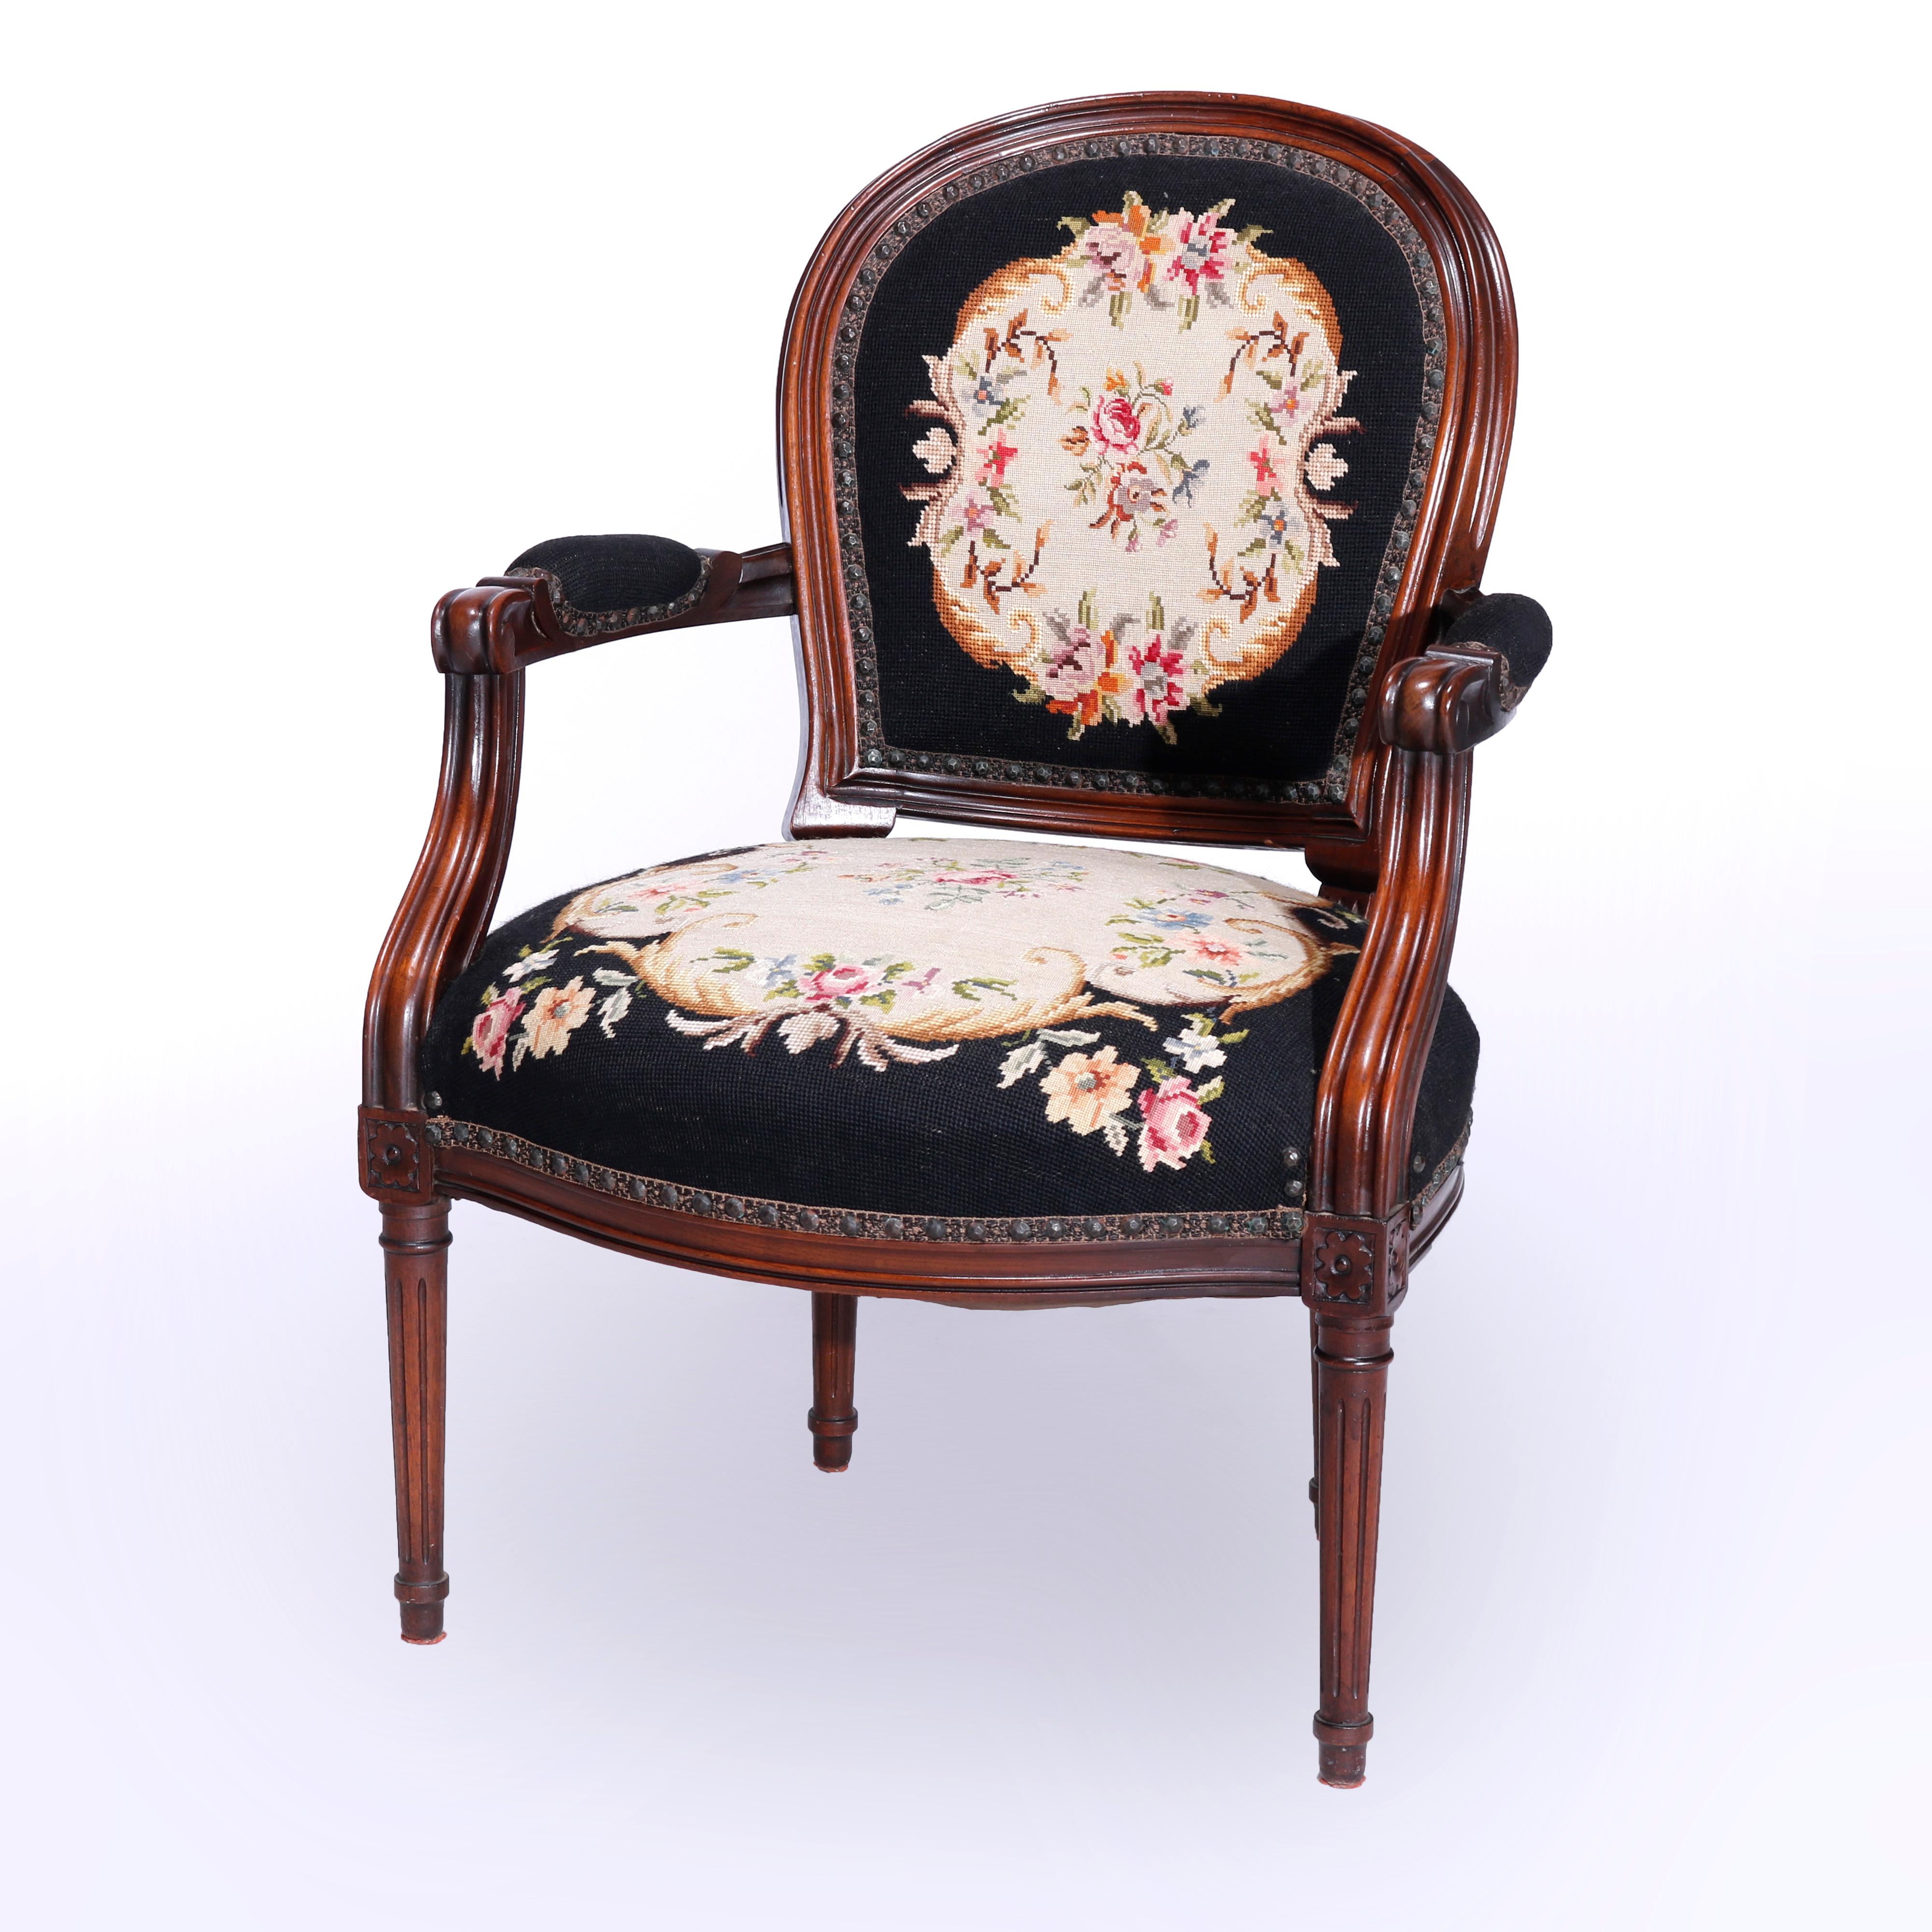 An antique French Louis XVI arm chair offers carved walnut frame with floral tapestry back seats and arms, raised on turned and reeded tapered legs, c1890

Measures - 33.75'' H x 23.5'' W x 26'' D; seat height 16''.

Catalogue Note: Ask about